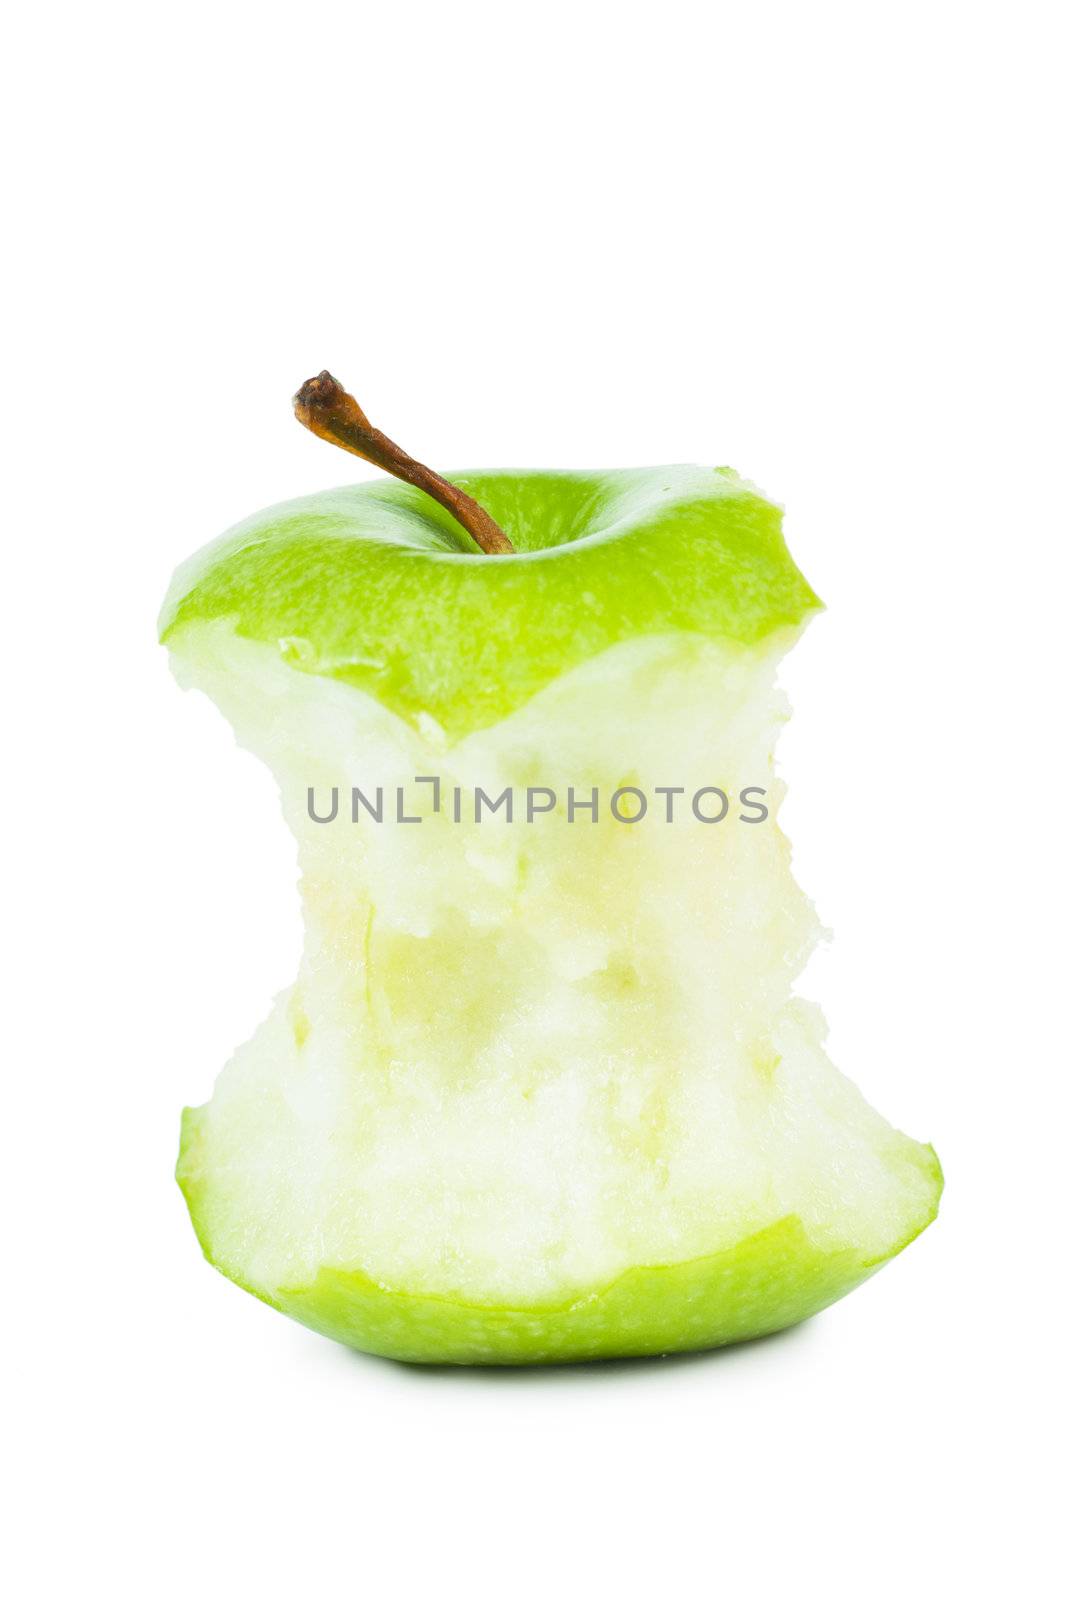 A core of green apple isolated over white background